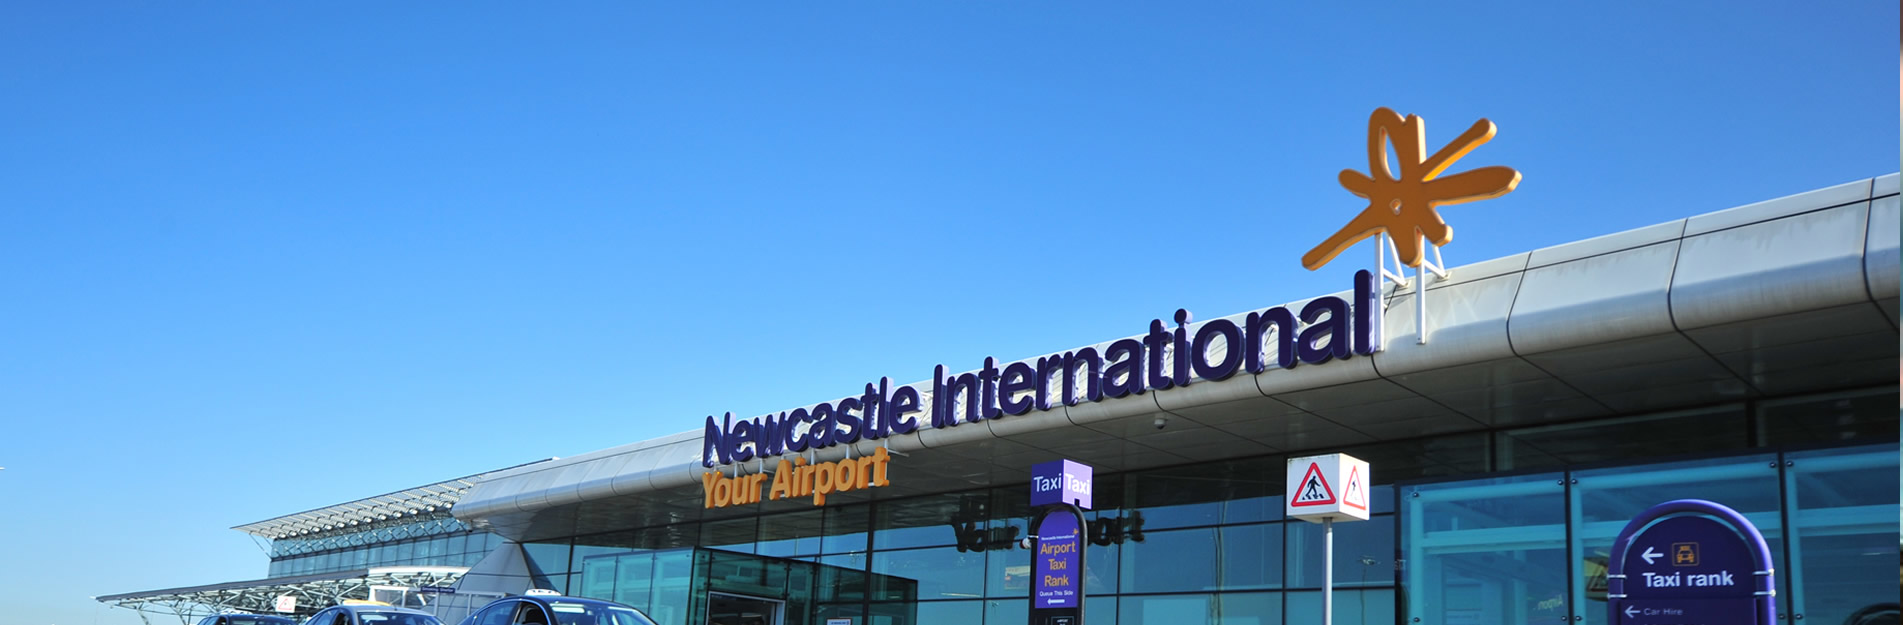 Jet2.com and Jet2holidays announces expanded Winter Sun programme for 2023/24 from Newcastle Airport 